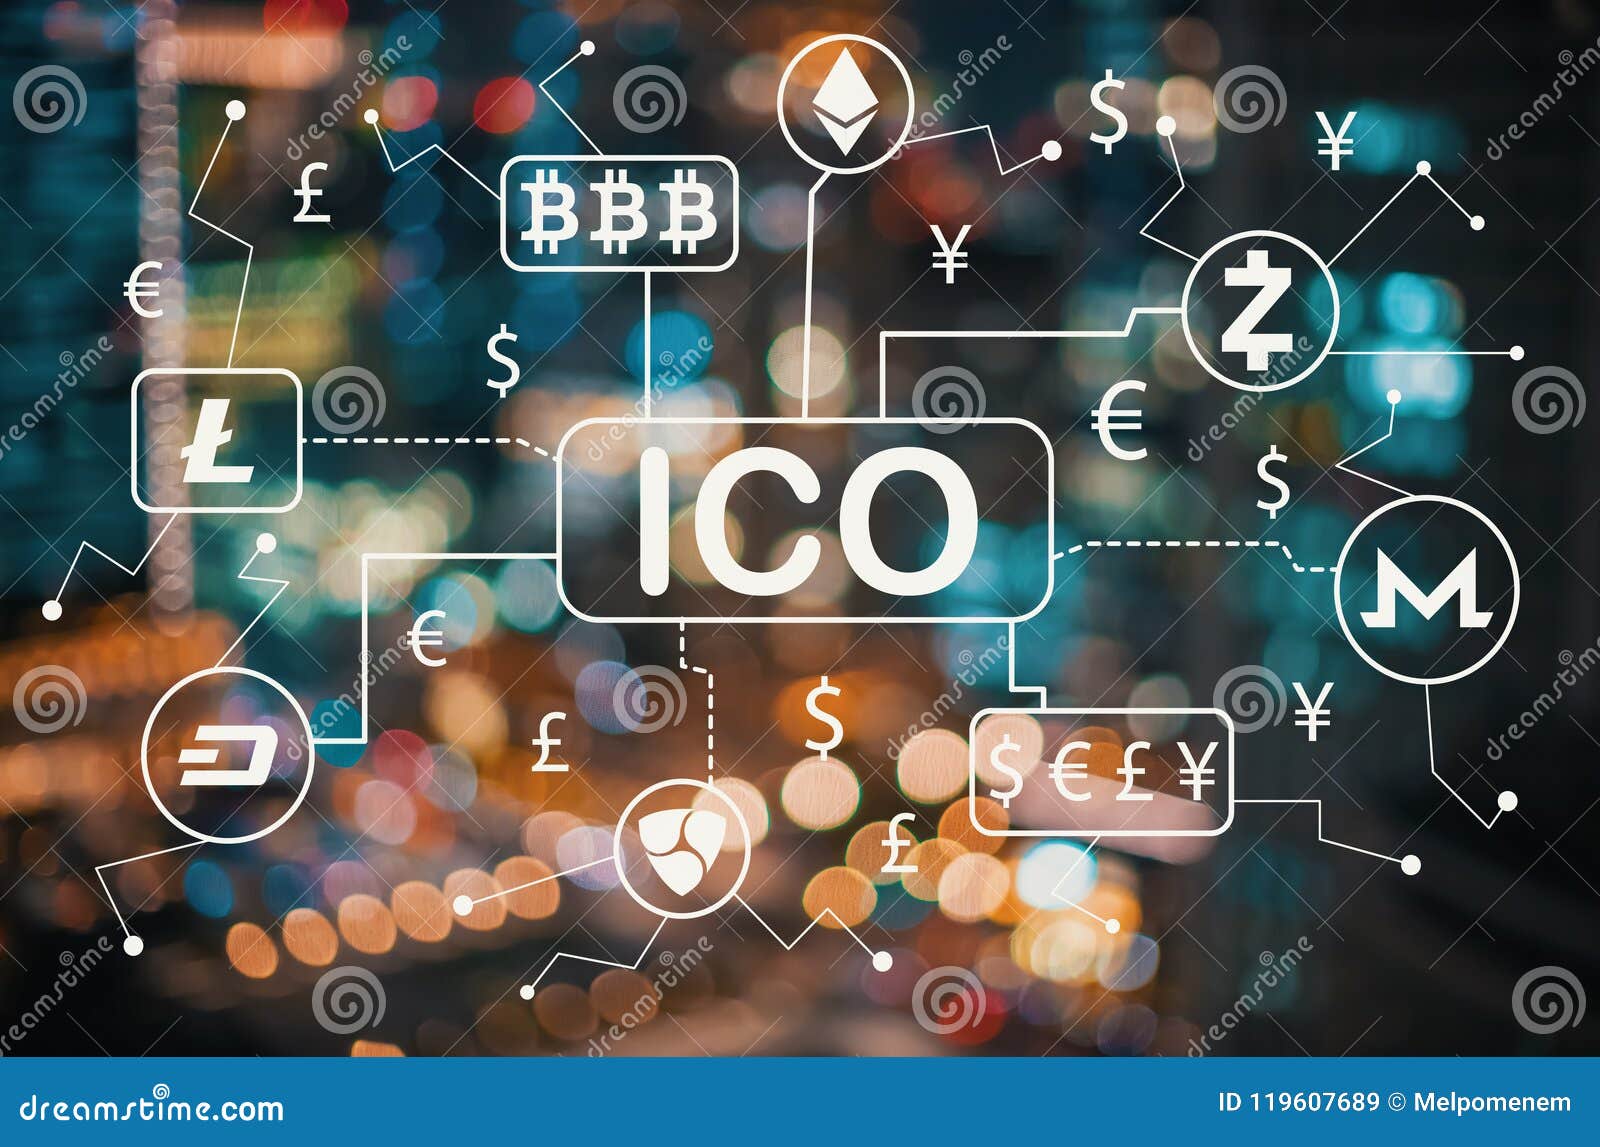 Cryptocurrency ICO Theme With Blurred City Lights Stock ...